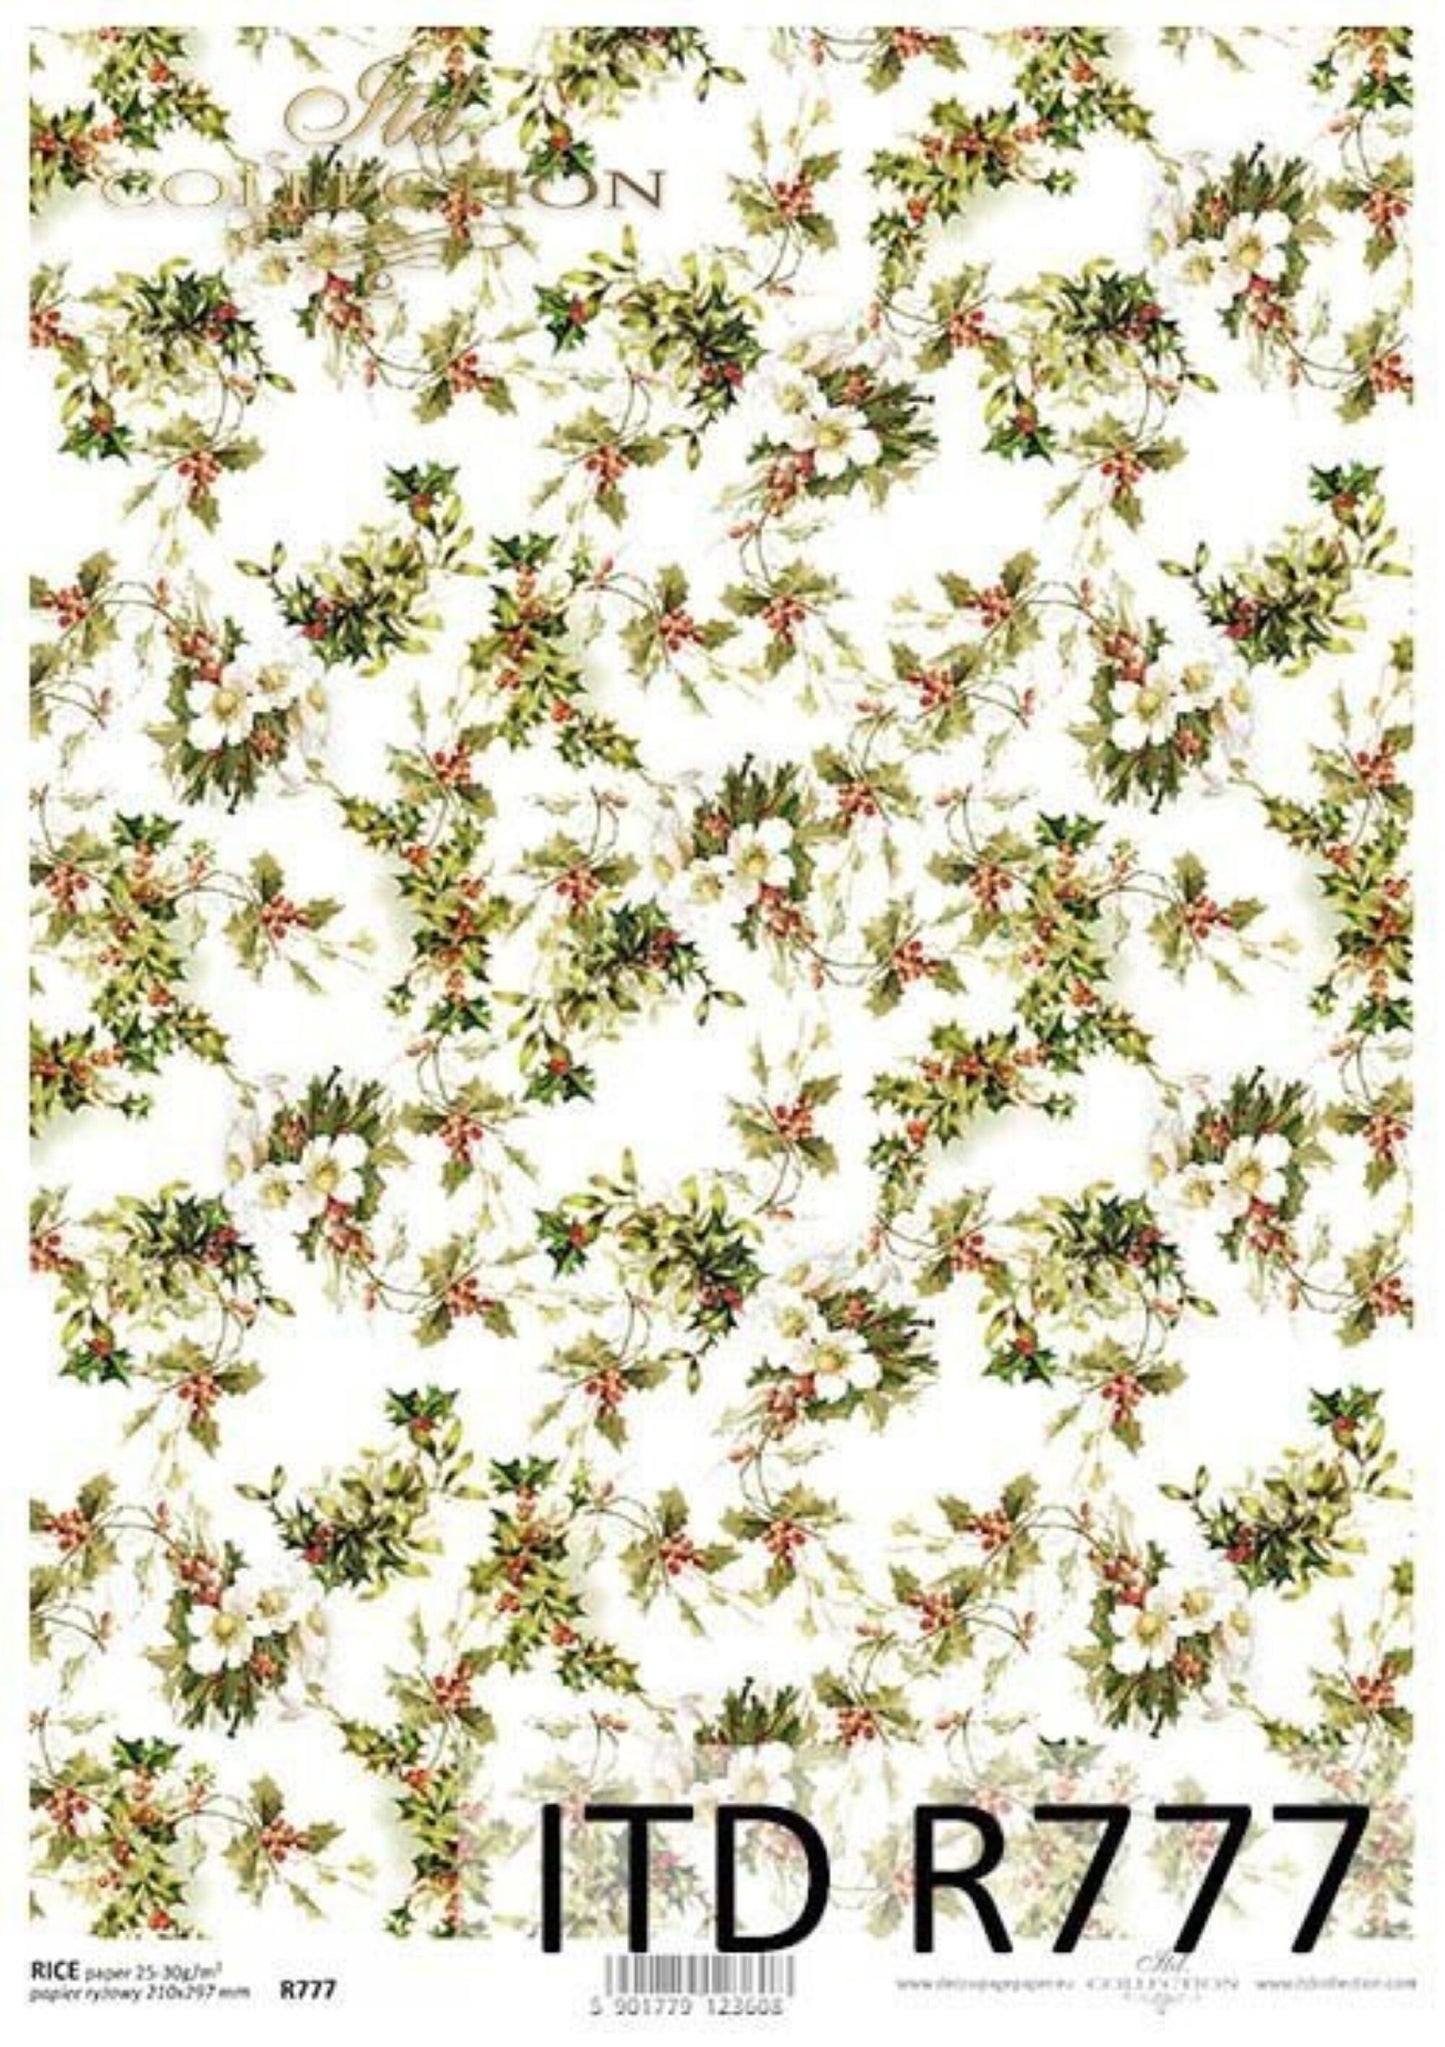 ITD Collection Rice Paper for Decoupage R0777, Size A4 - 210x297 mm, 8.27x11.7 inch, Christmas Holly, Flowers, Floral Trim